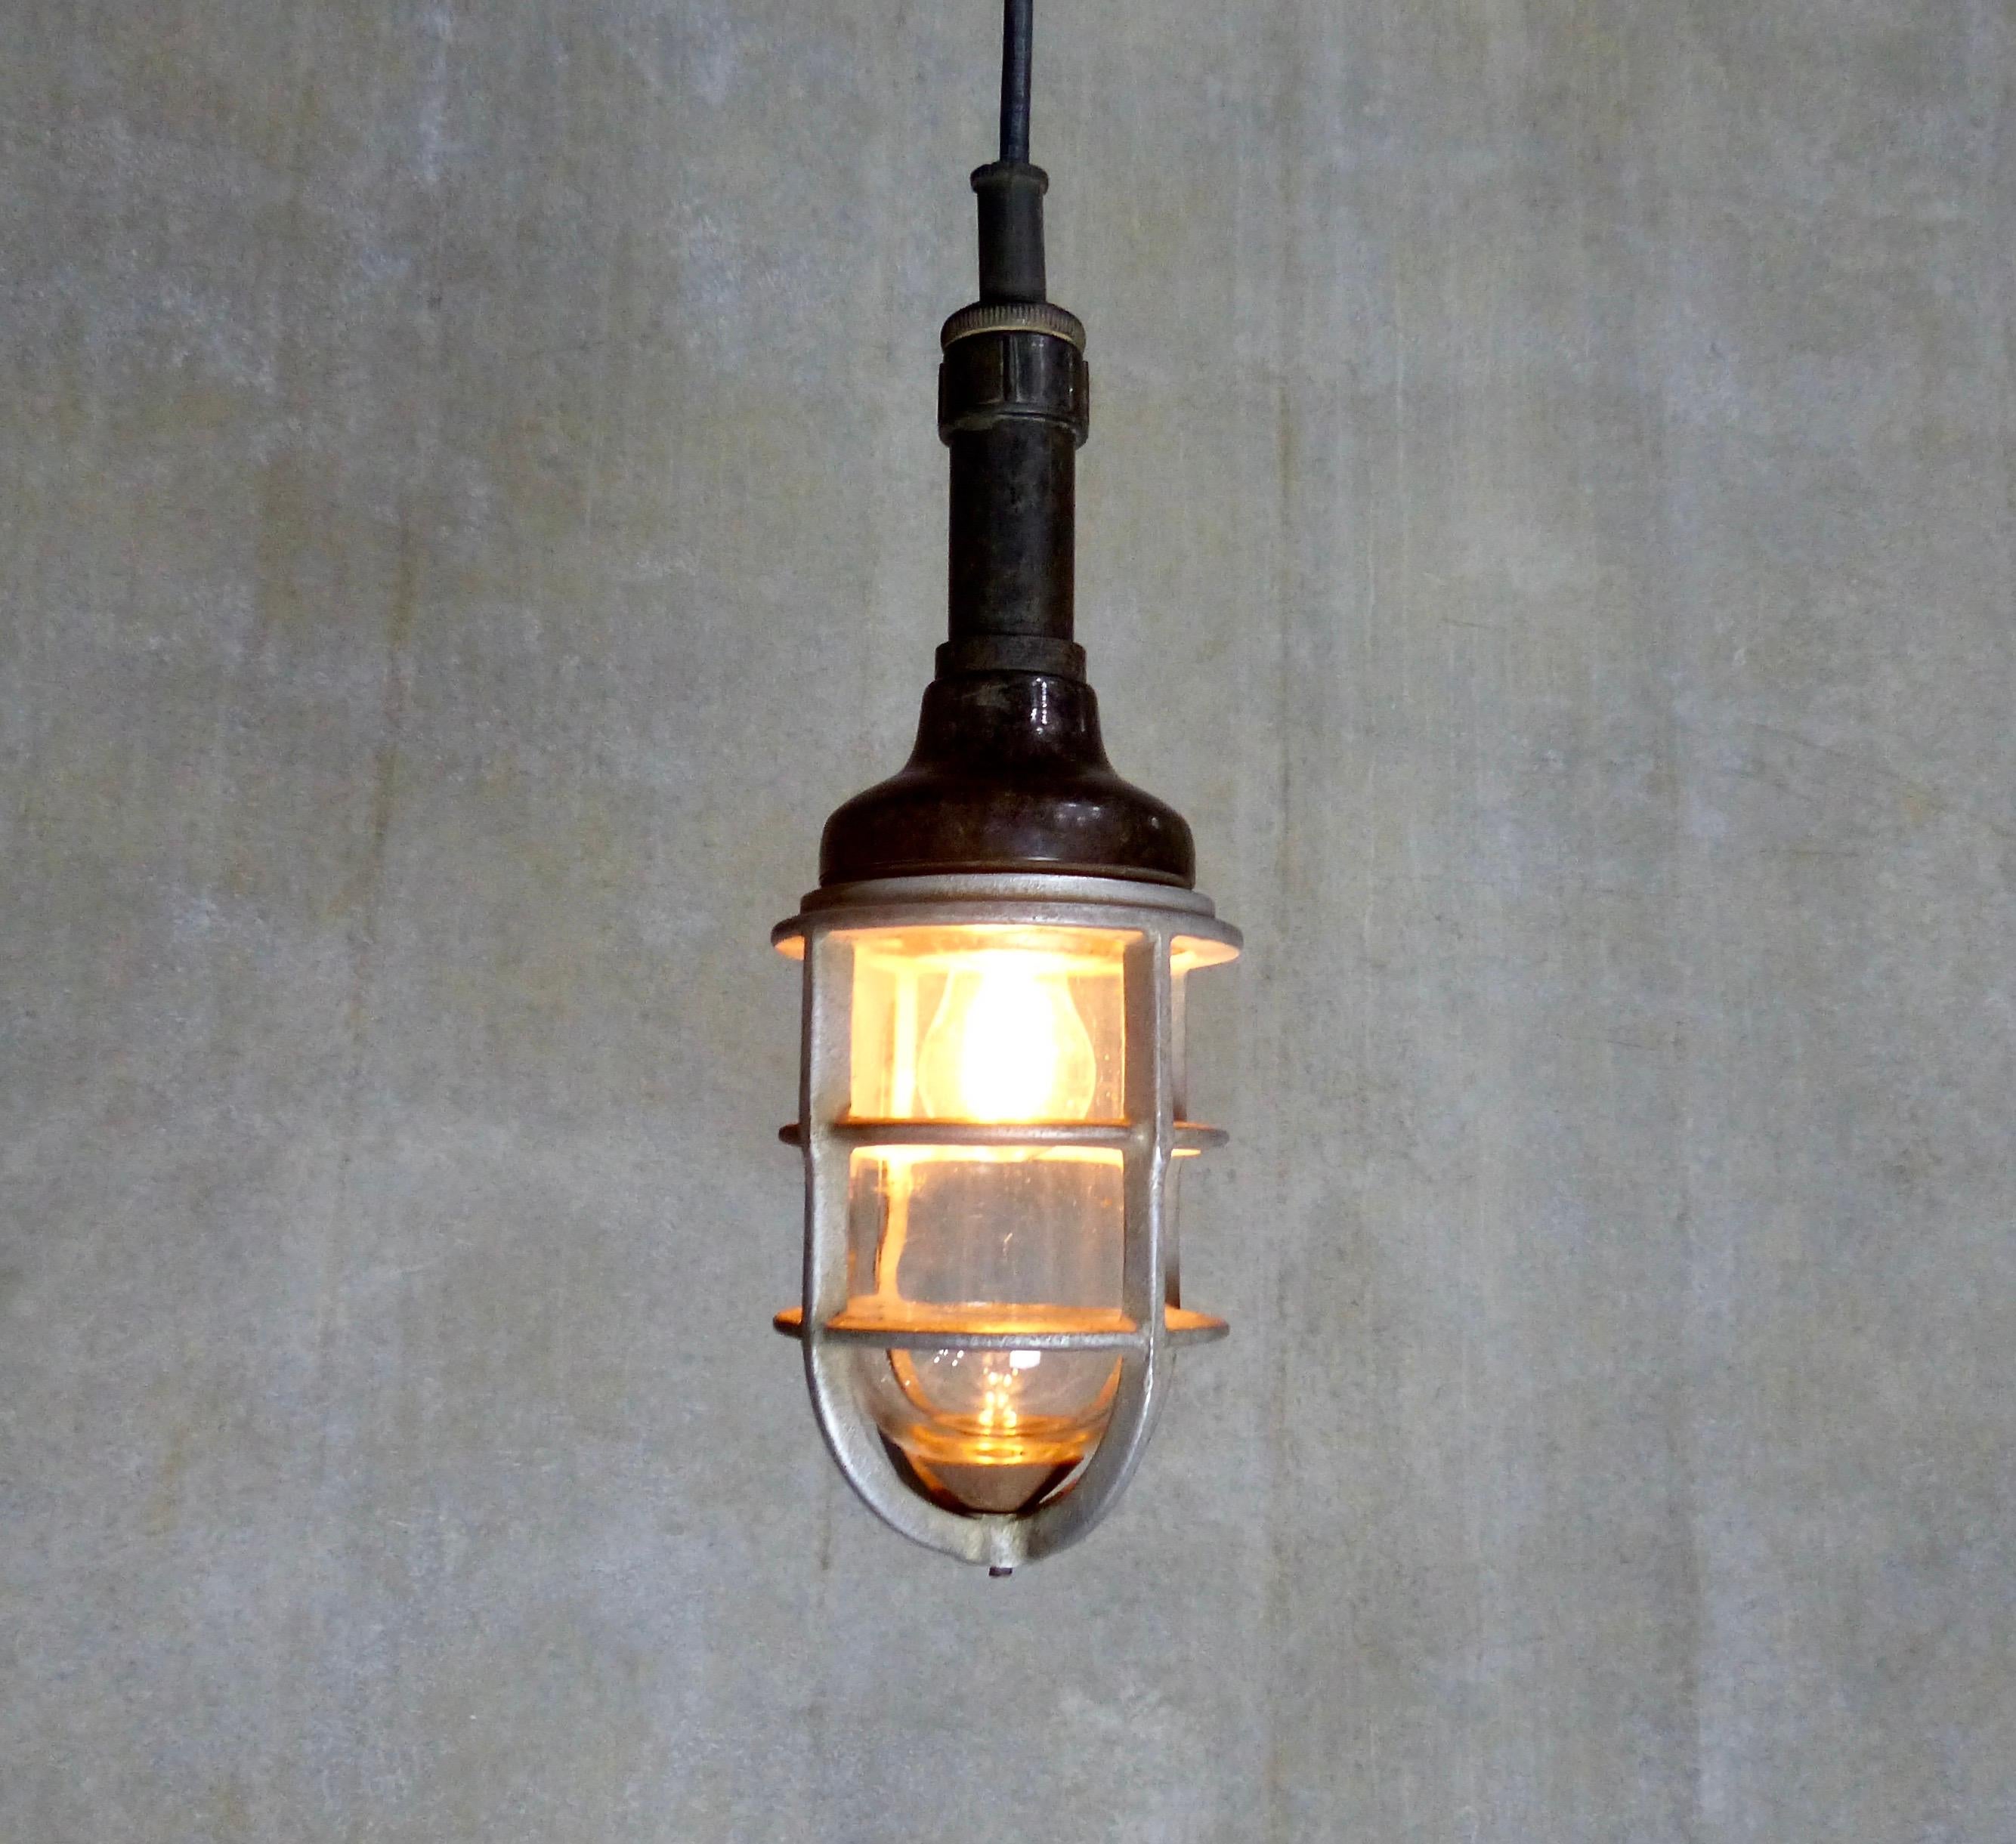 A circa 1940 General Electric industrial “trouble light’ converted into a pendant. Cast metal cage and glass shade with a Bakelite topper. Re-wired and inspected and approved to current electrical standards; ceiling mounting plate included.